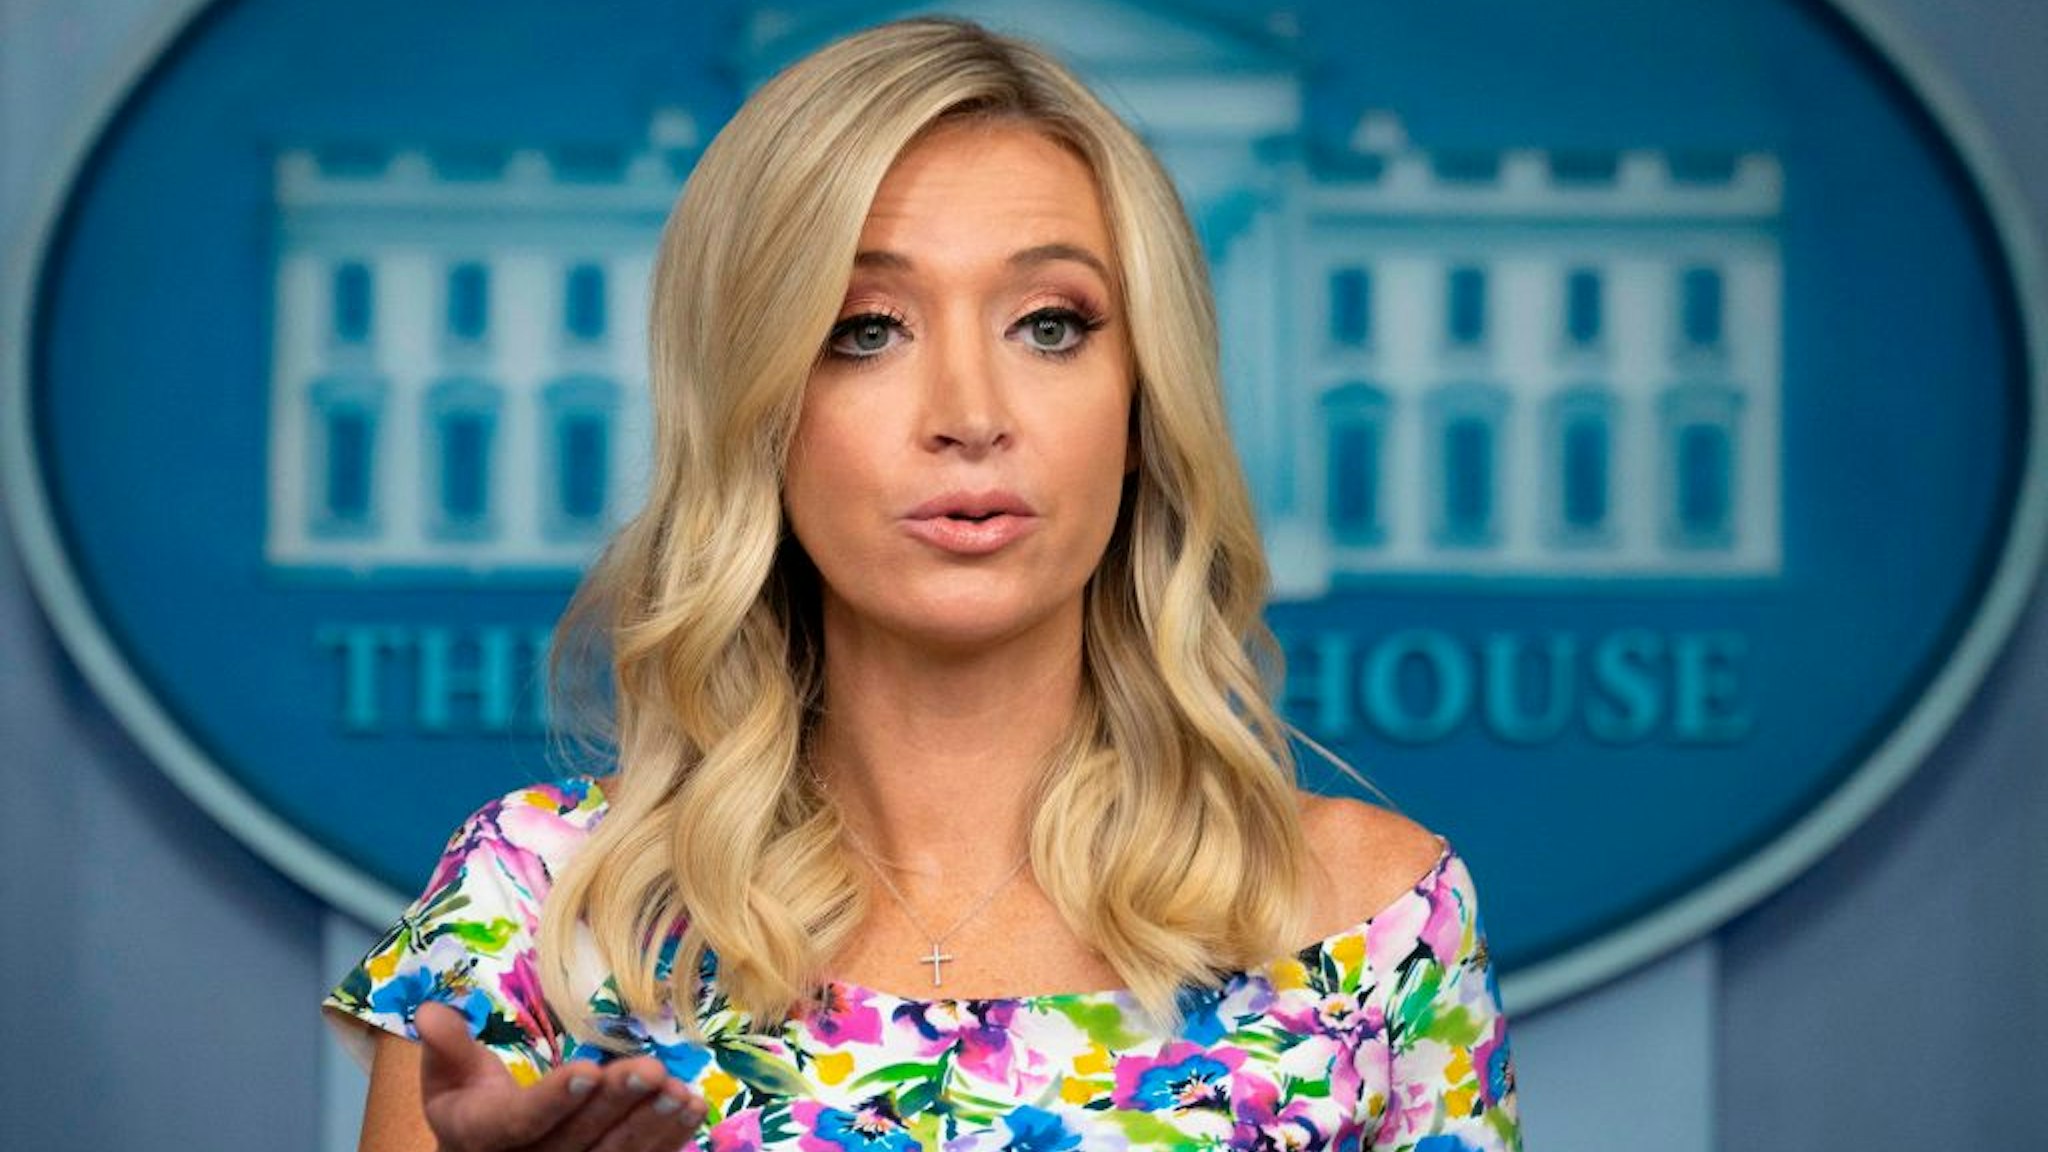 White House Press Secretary Kayleigh McEnany speaks during the press briefing at the White House in Washington, DC, on July 1, 2020.